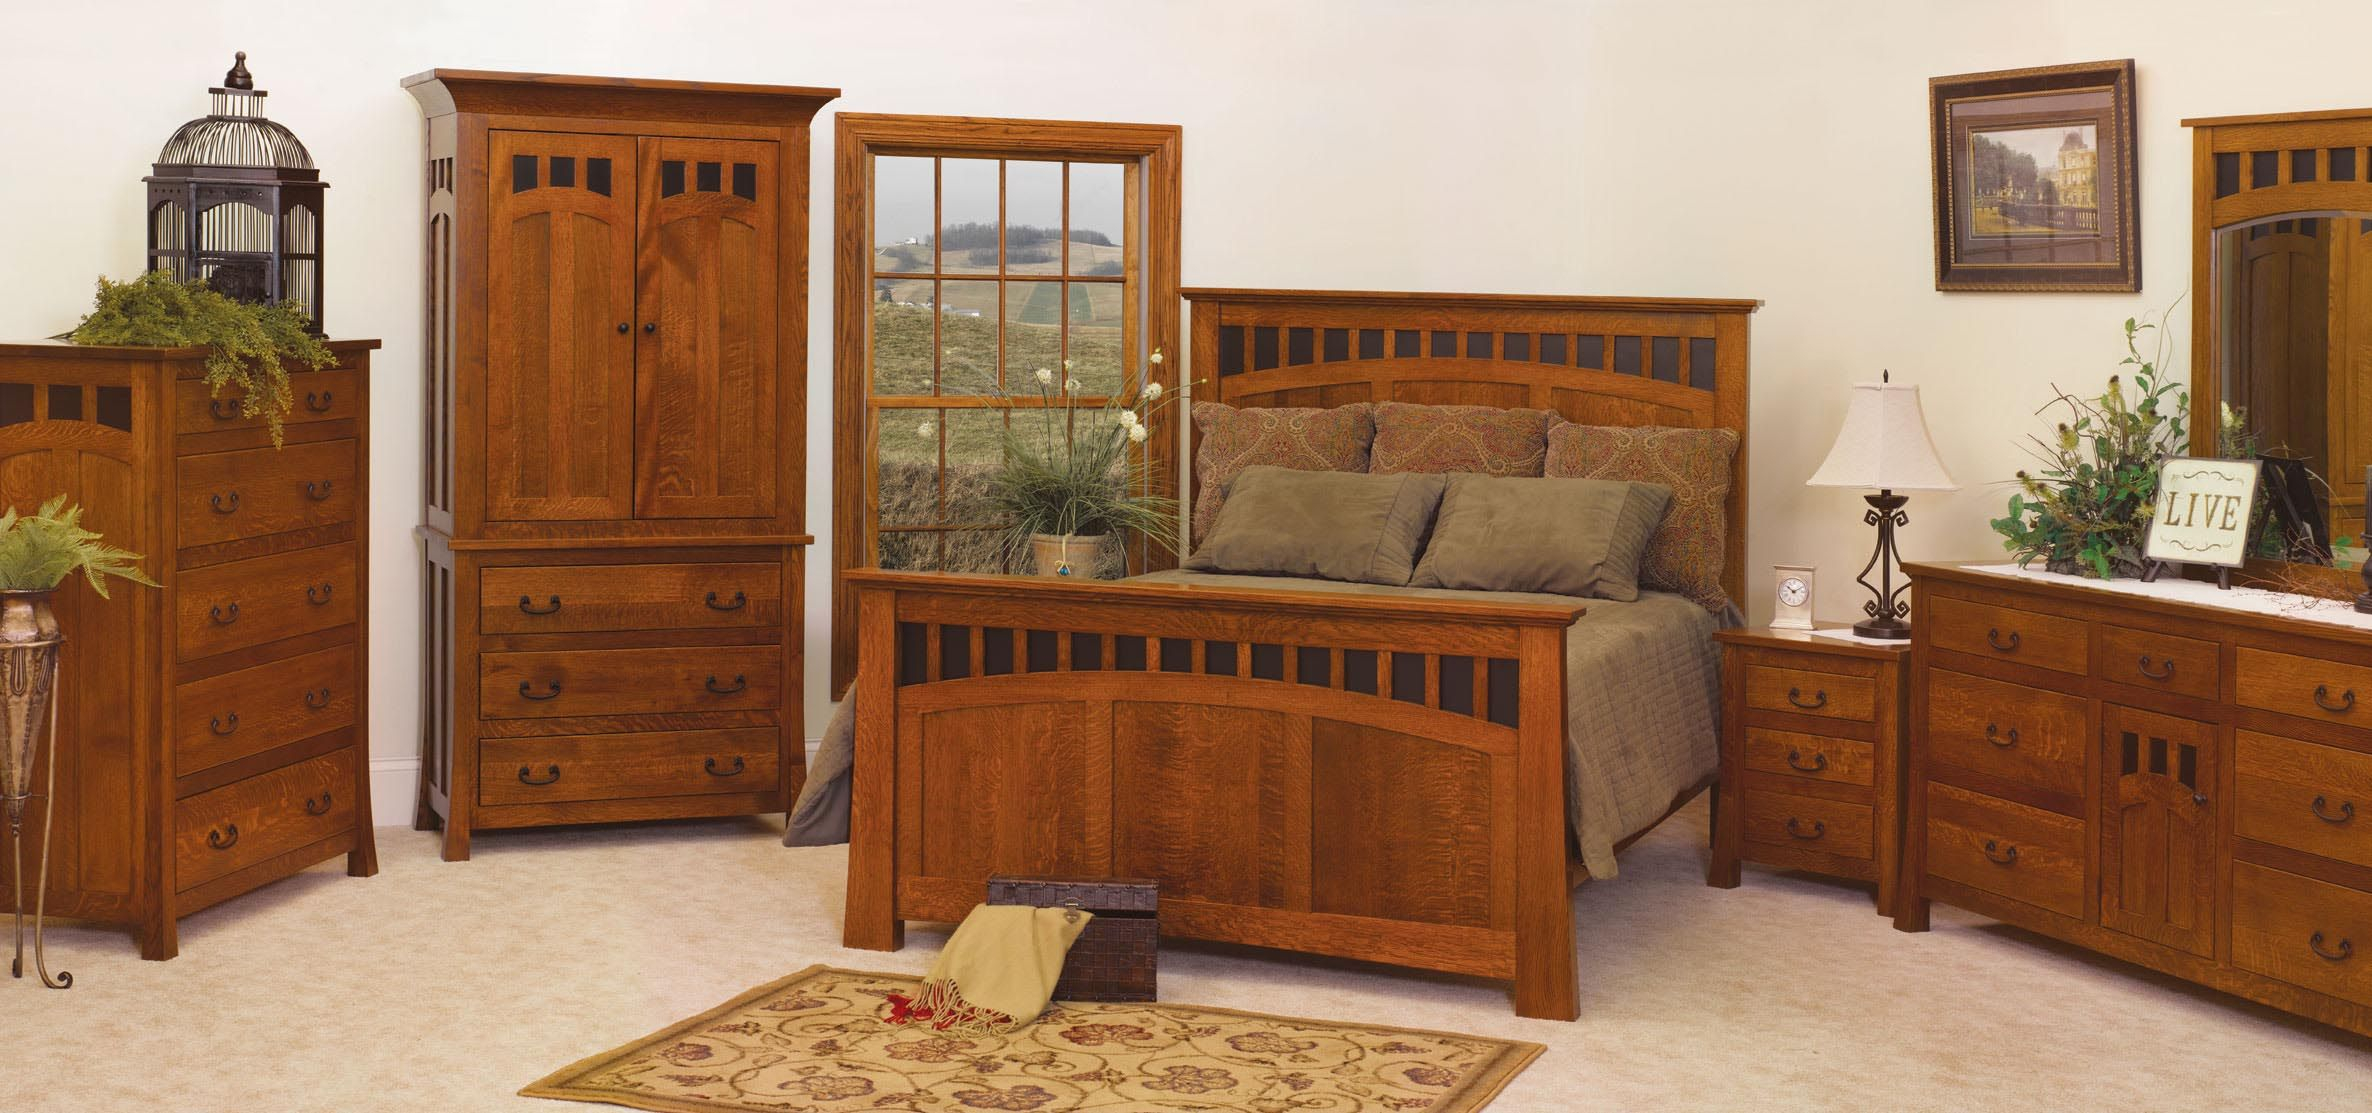 Mission Style Bedroom Furniture Sets Furniture In 2019 regarding sizing 2372 X 1113